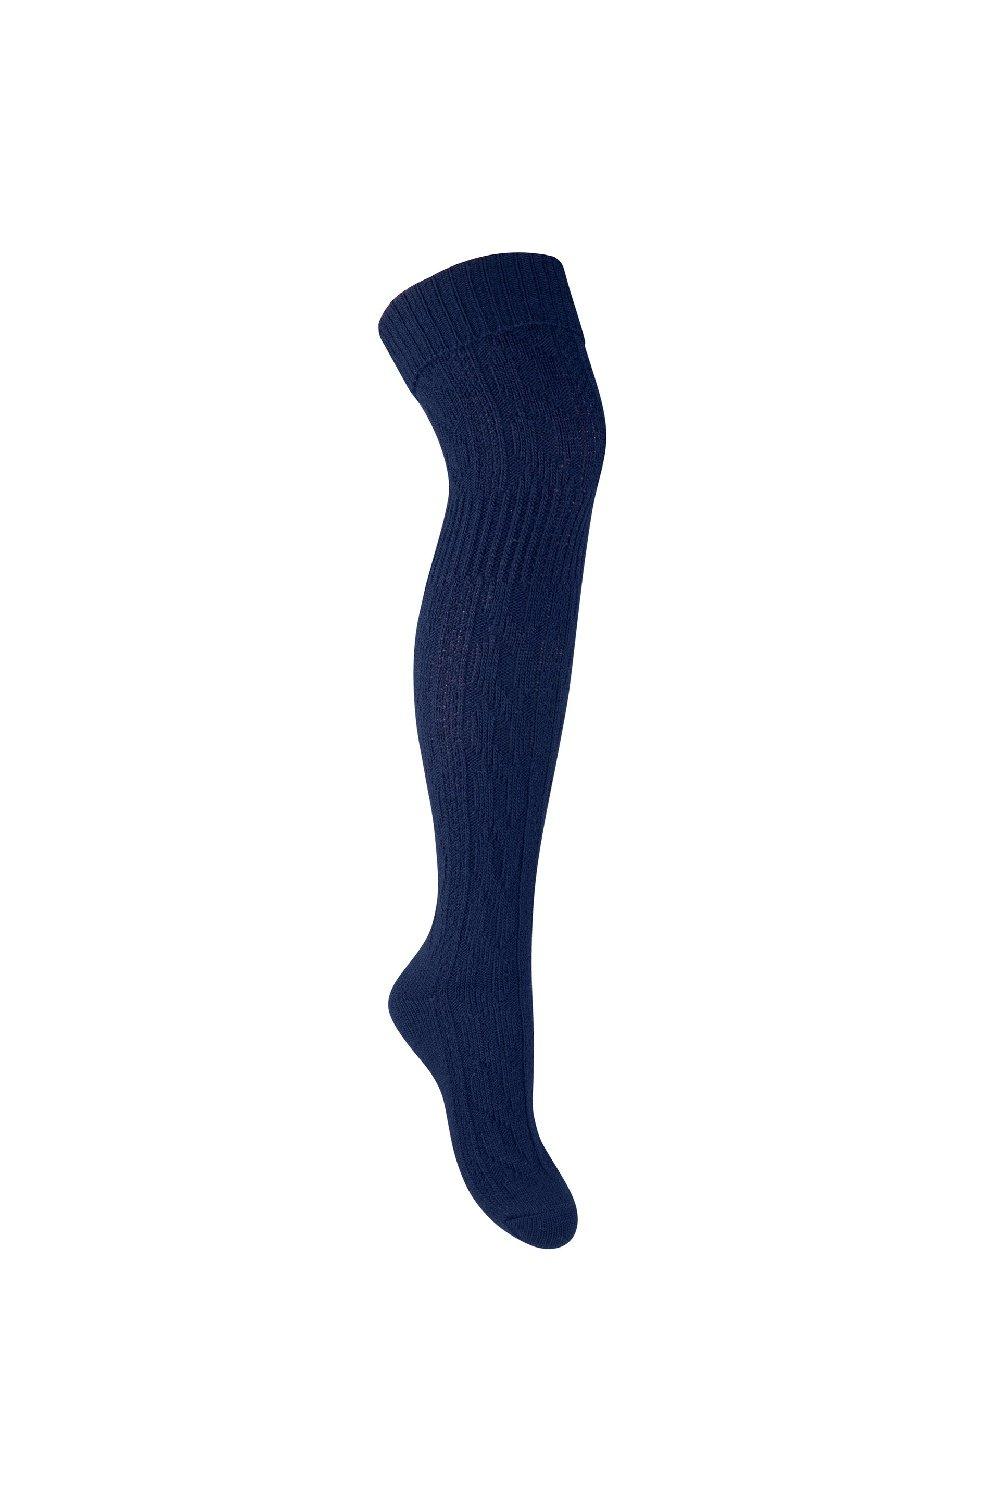 Thigh High Wool Winter Warm Thick Over The Knee Socks